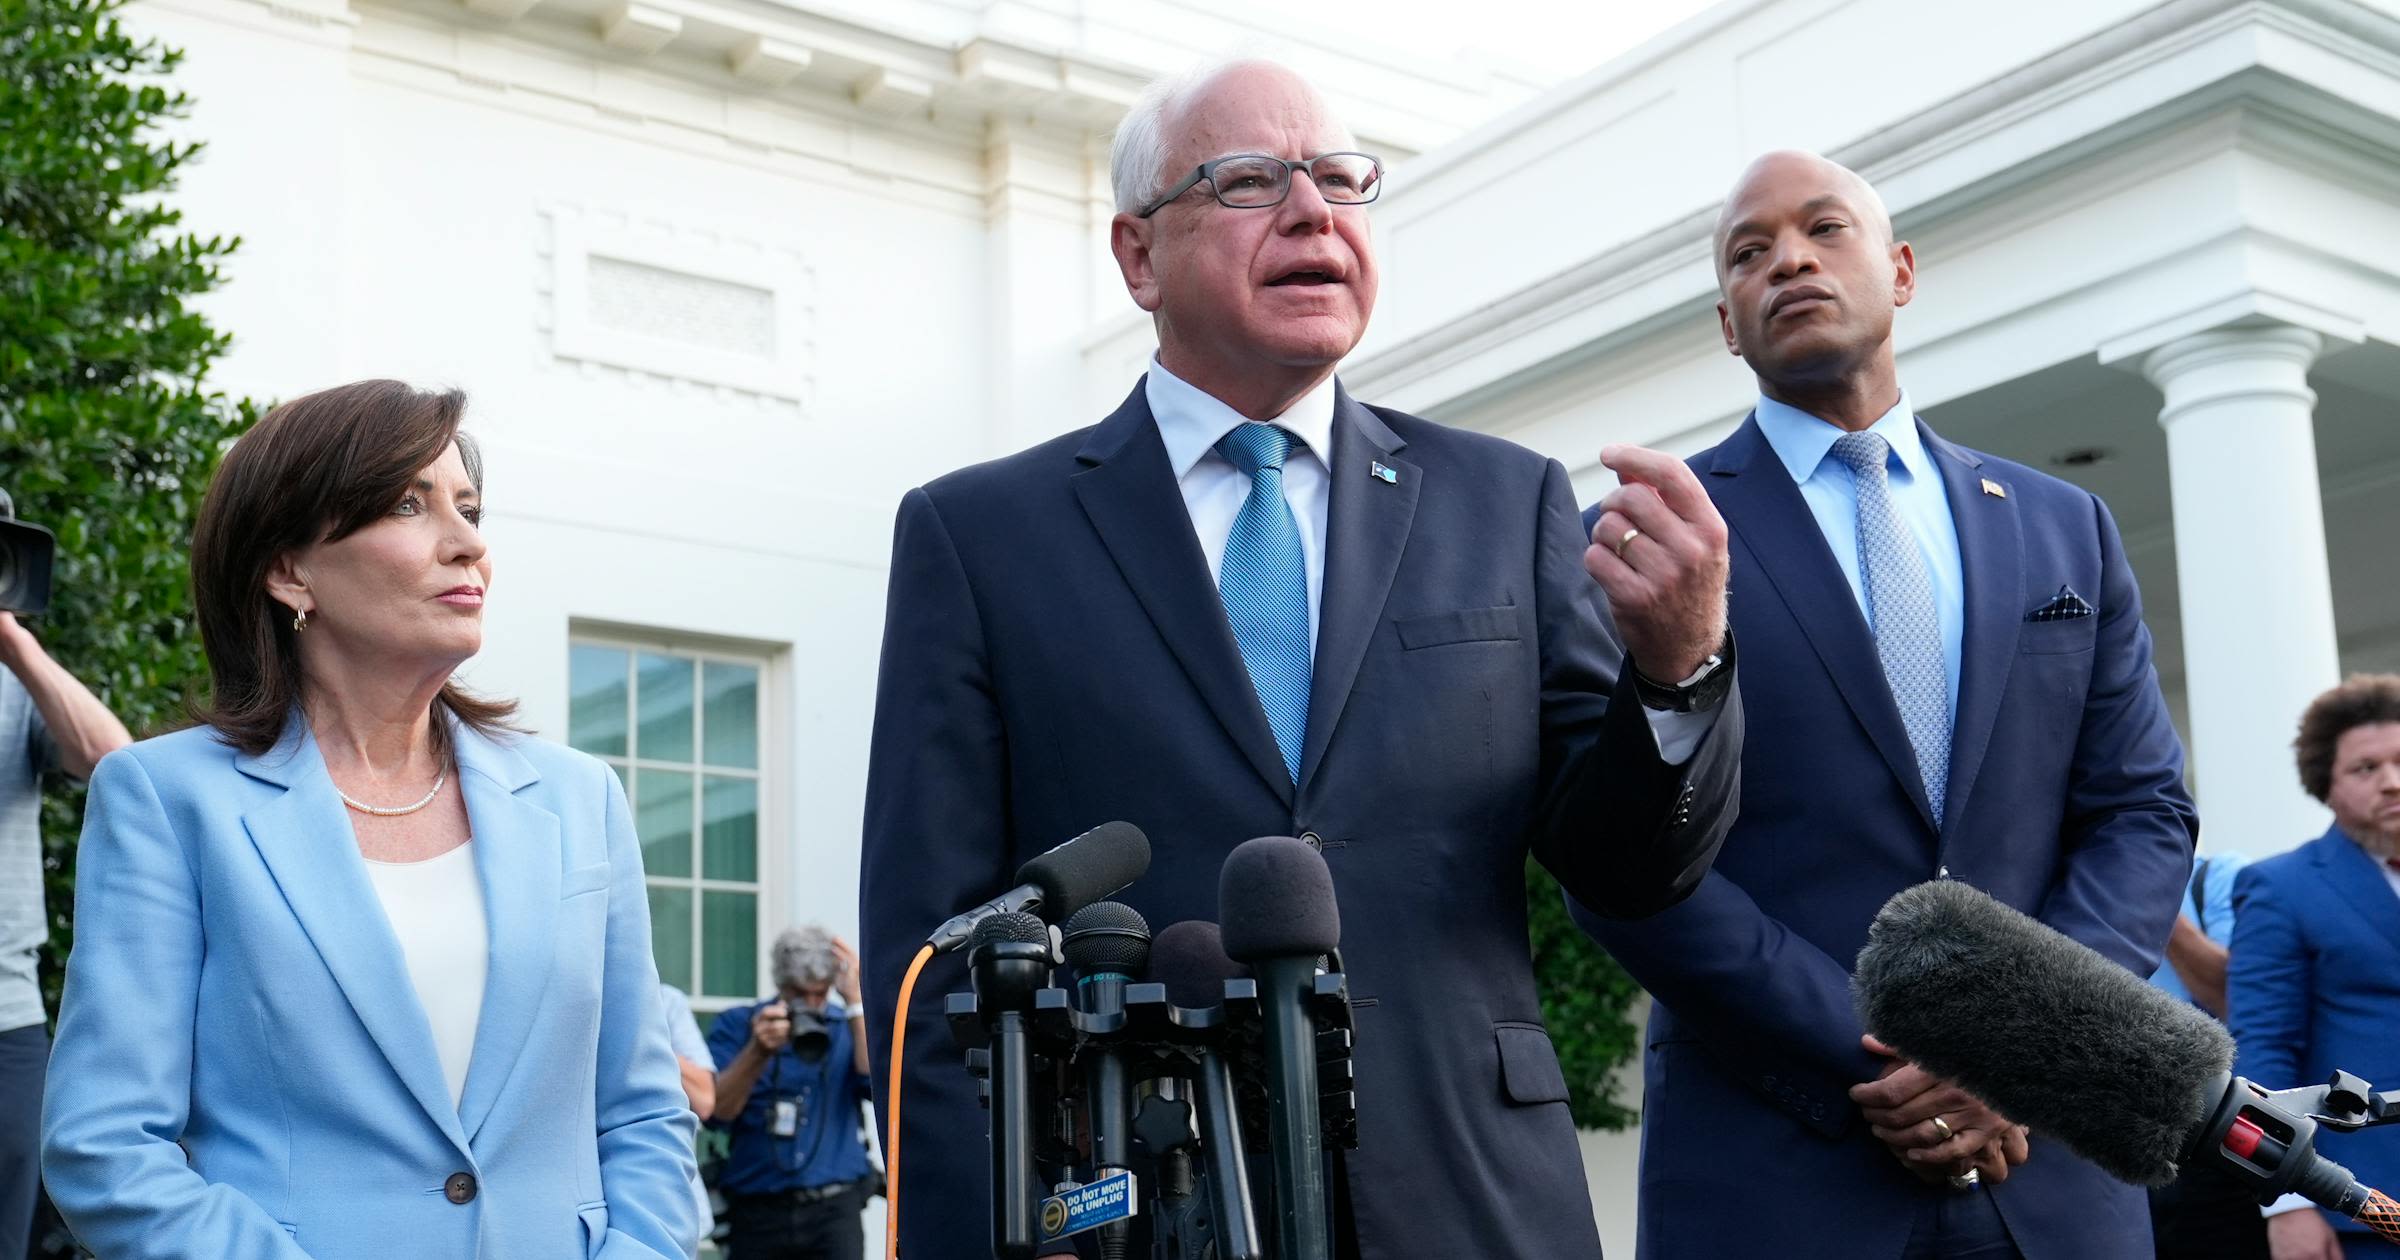 As Gov. Tim Walz's national profile rises, he's in the middle of discussions about Biden's future